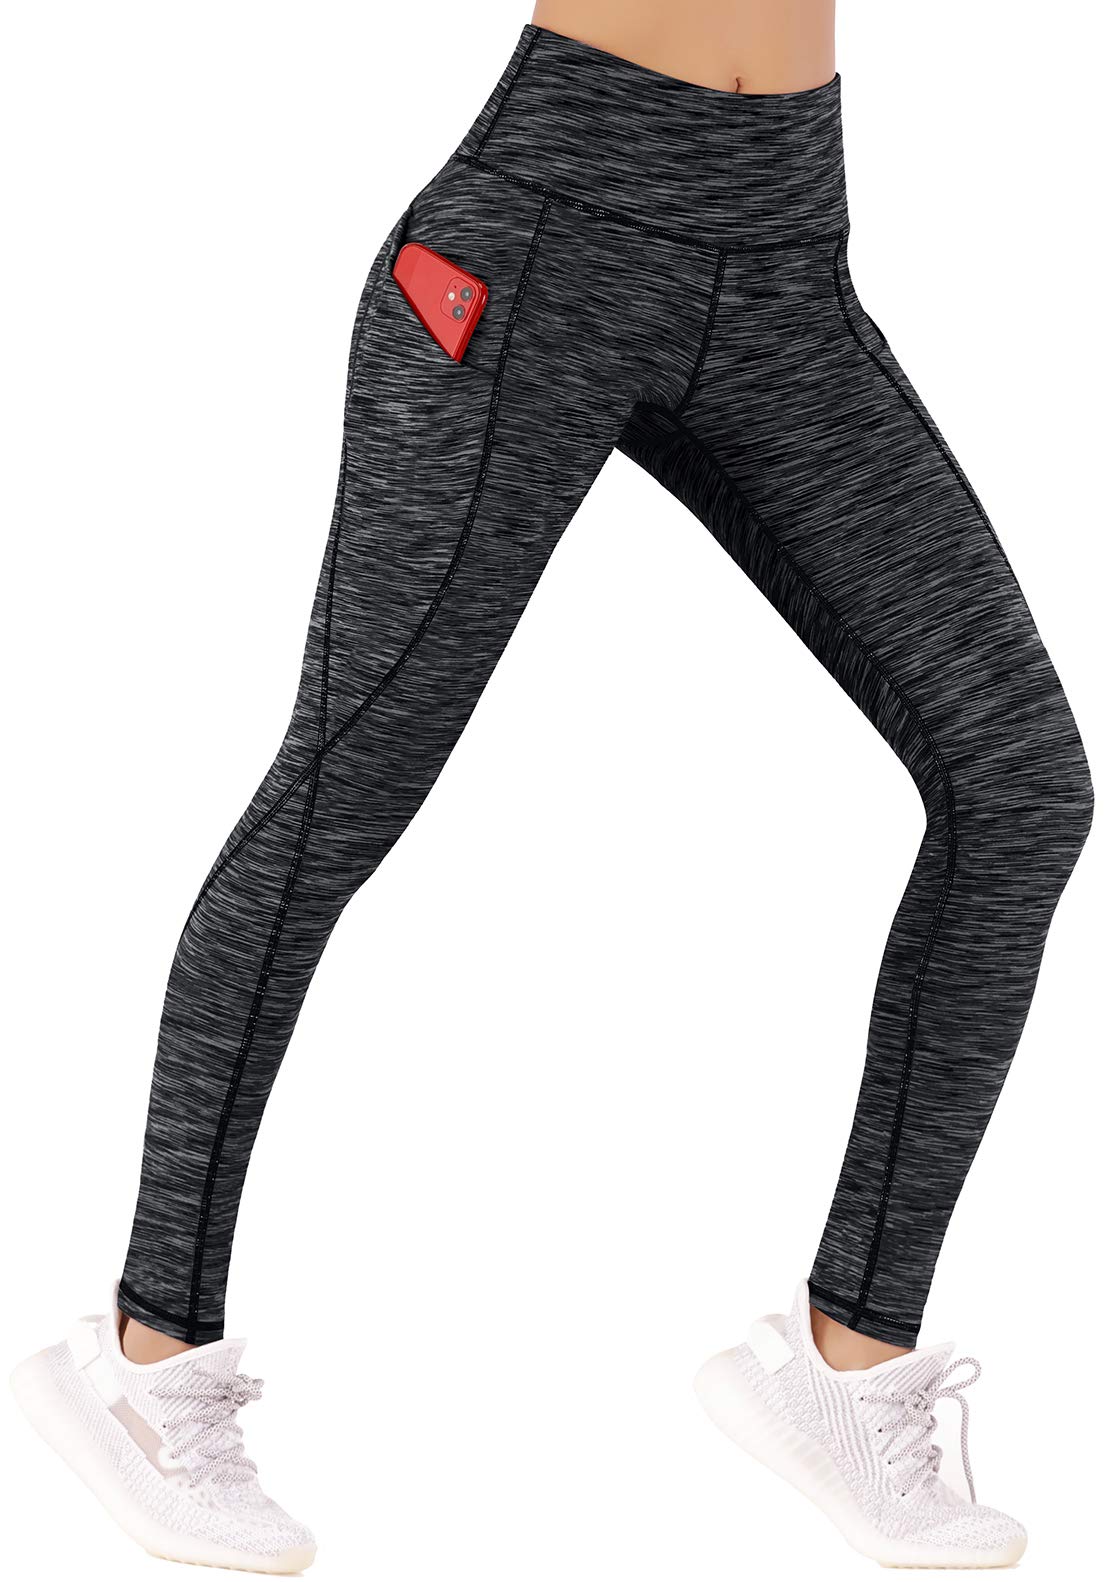 Warm Fleece Lined Leggings for Women Winter High Waisted Yoga Pants with  Pockets Thermal Workout Legging